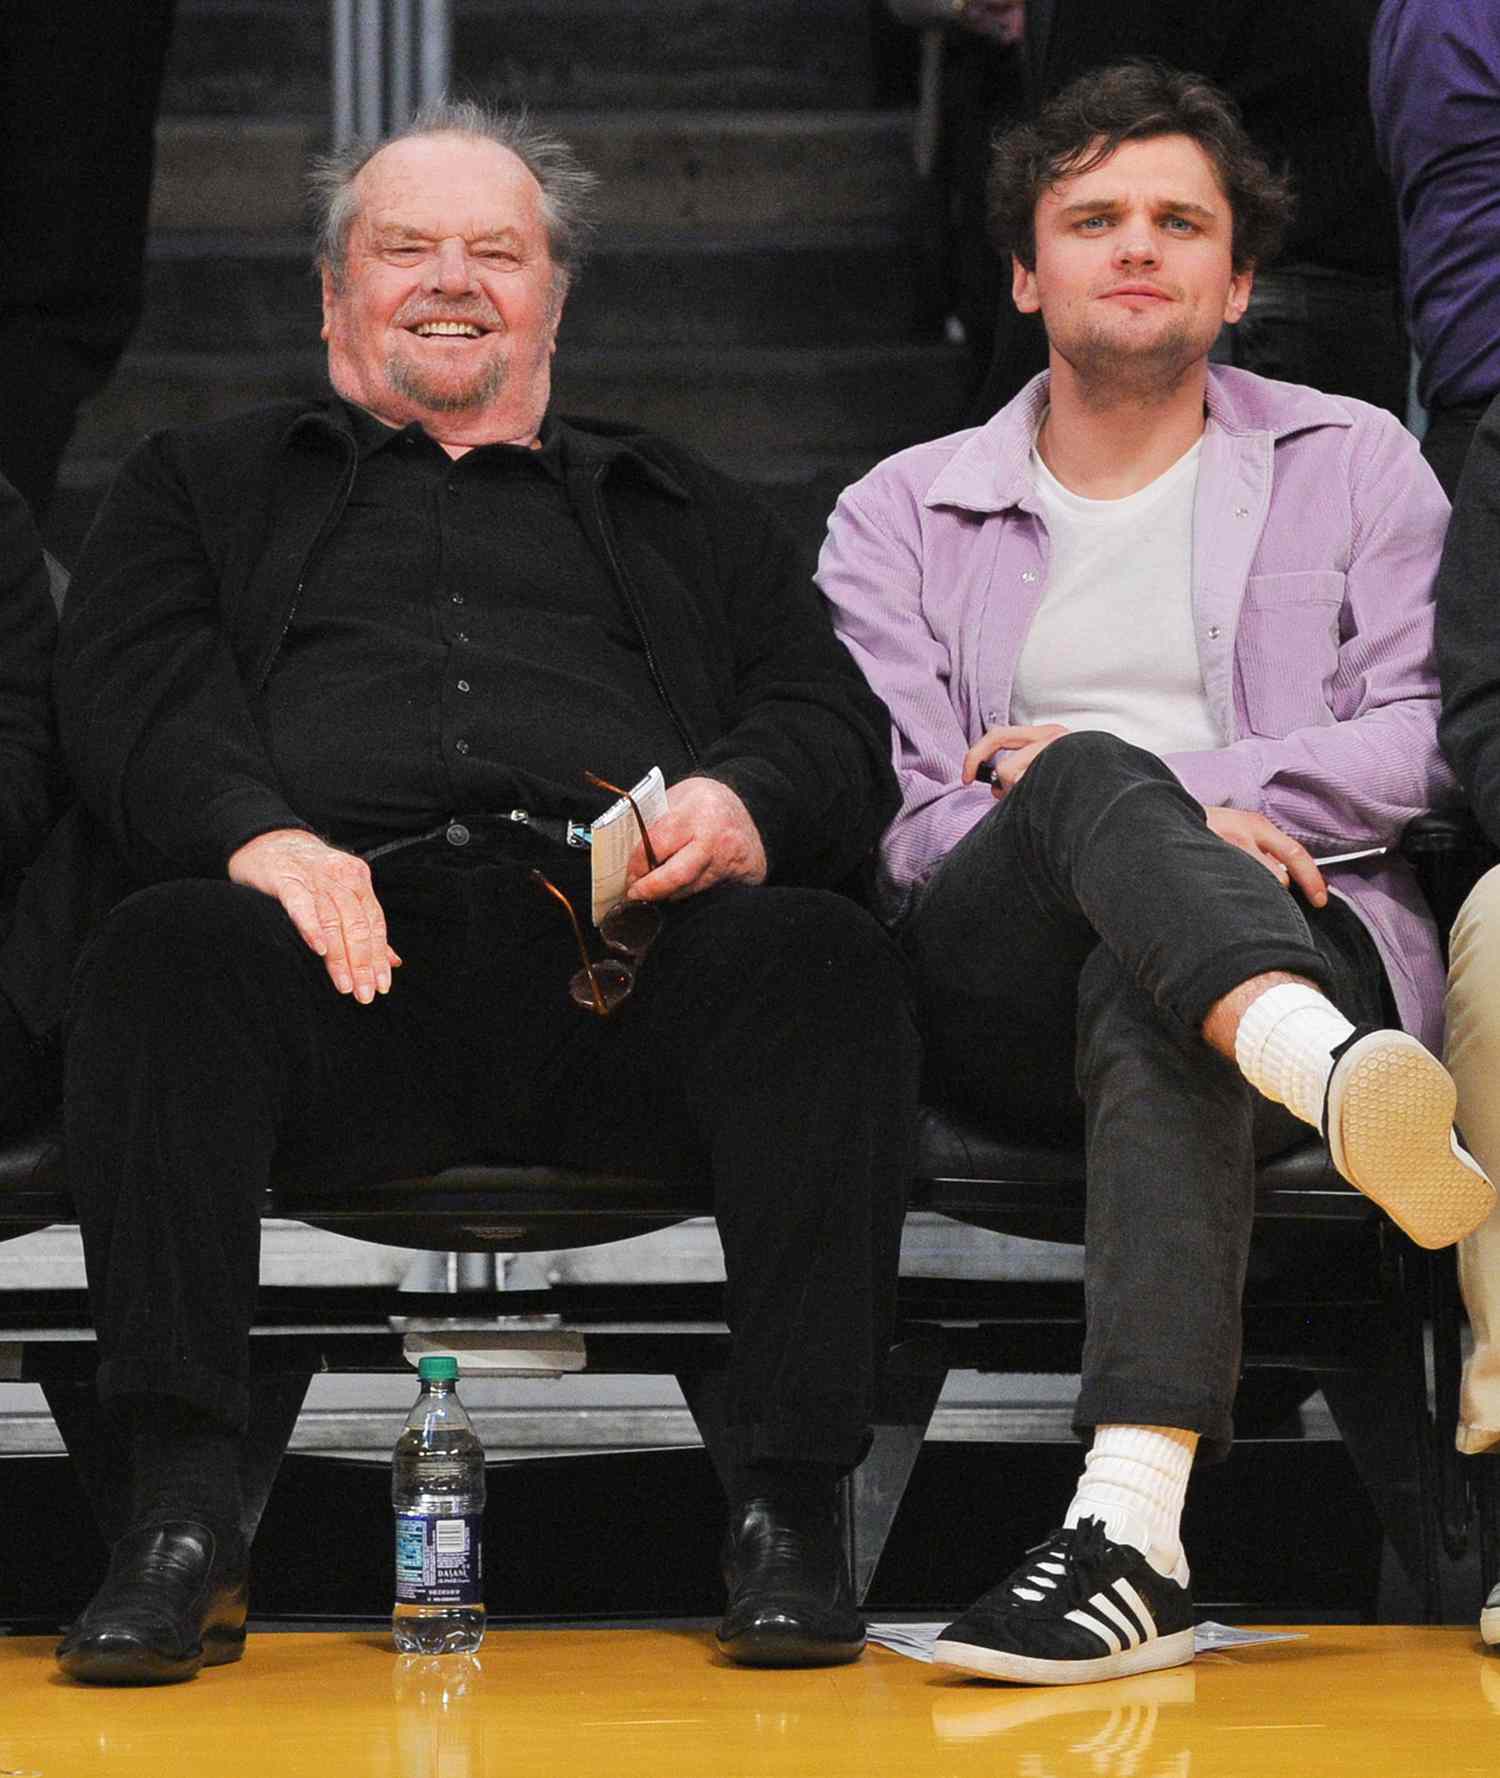 Jack Nicholson, 81, Son Ray, 26, Cheer on the Lakers